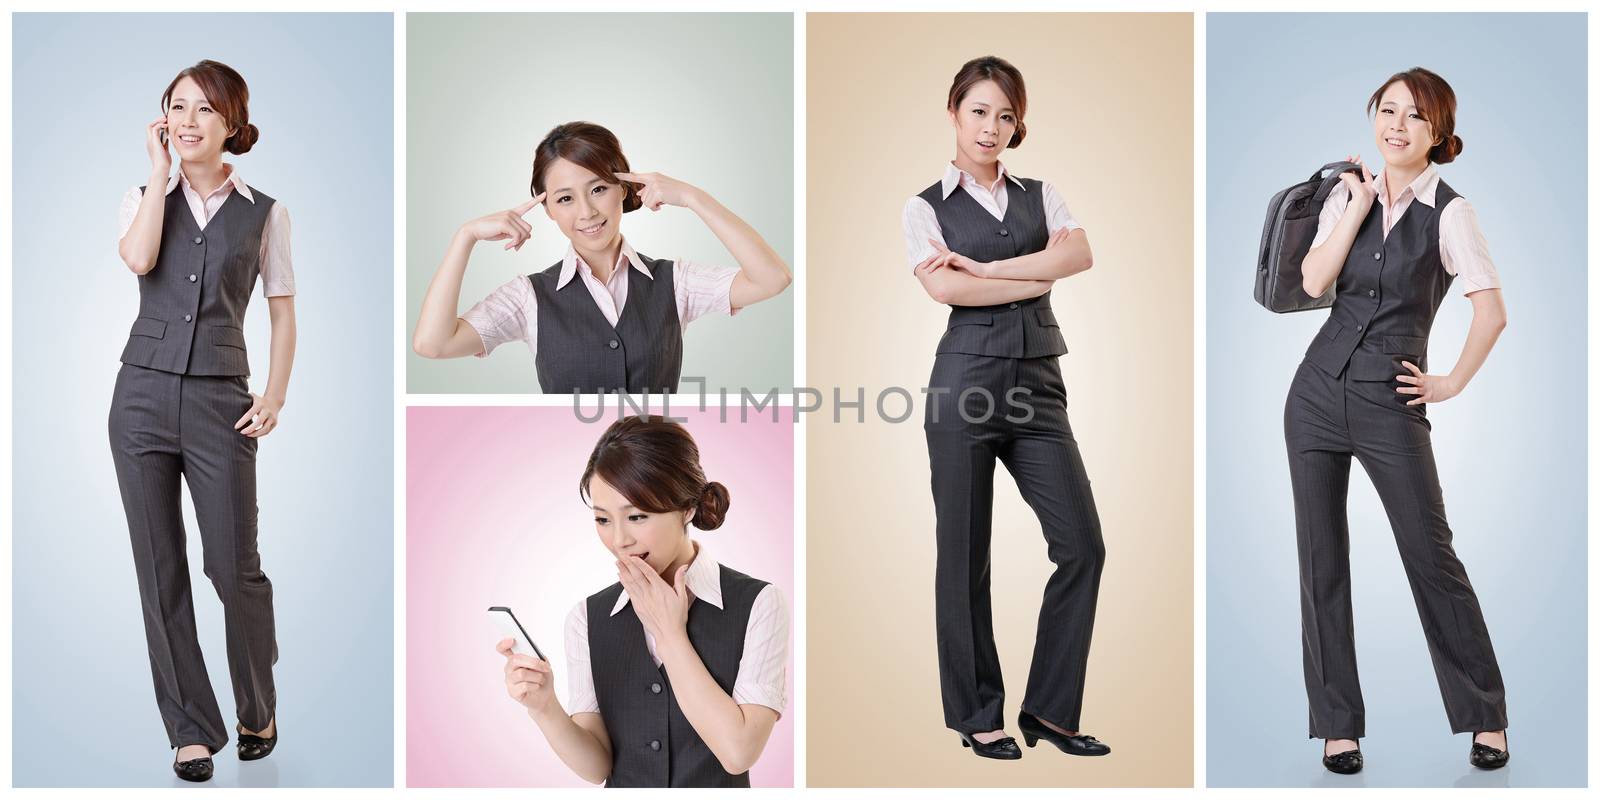 business woman collection by elwynn